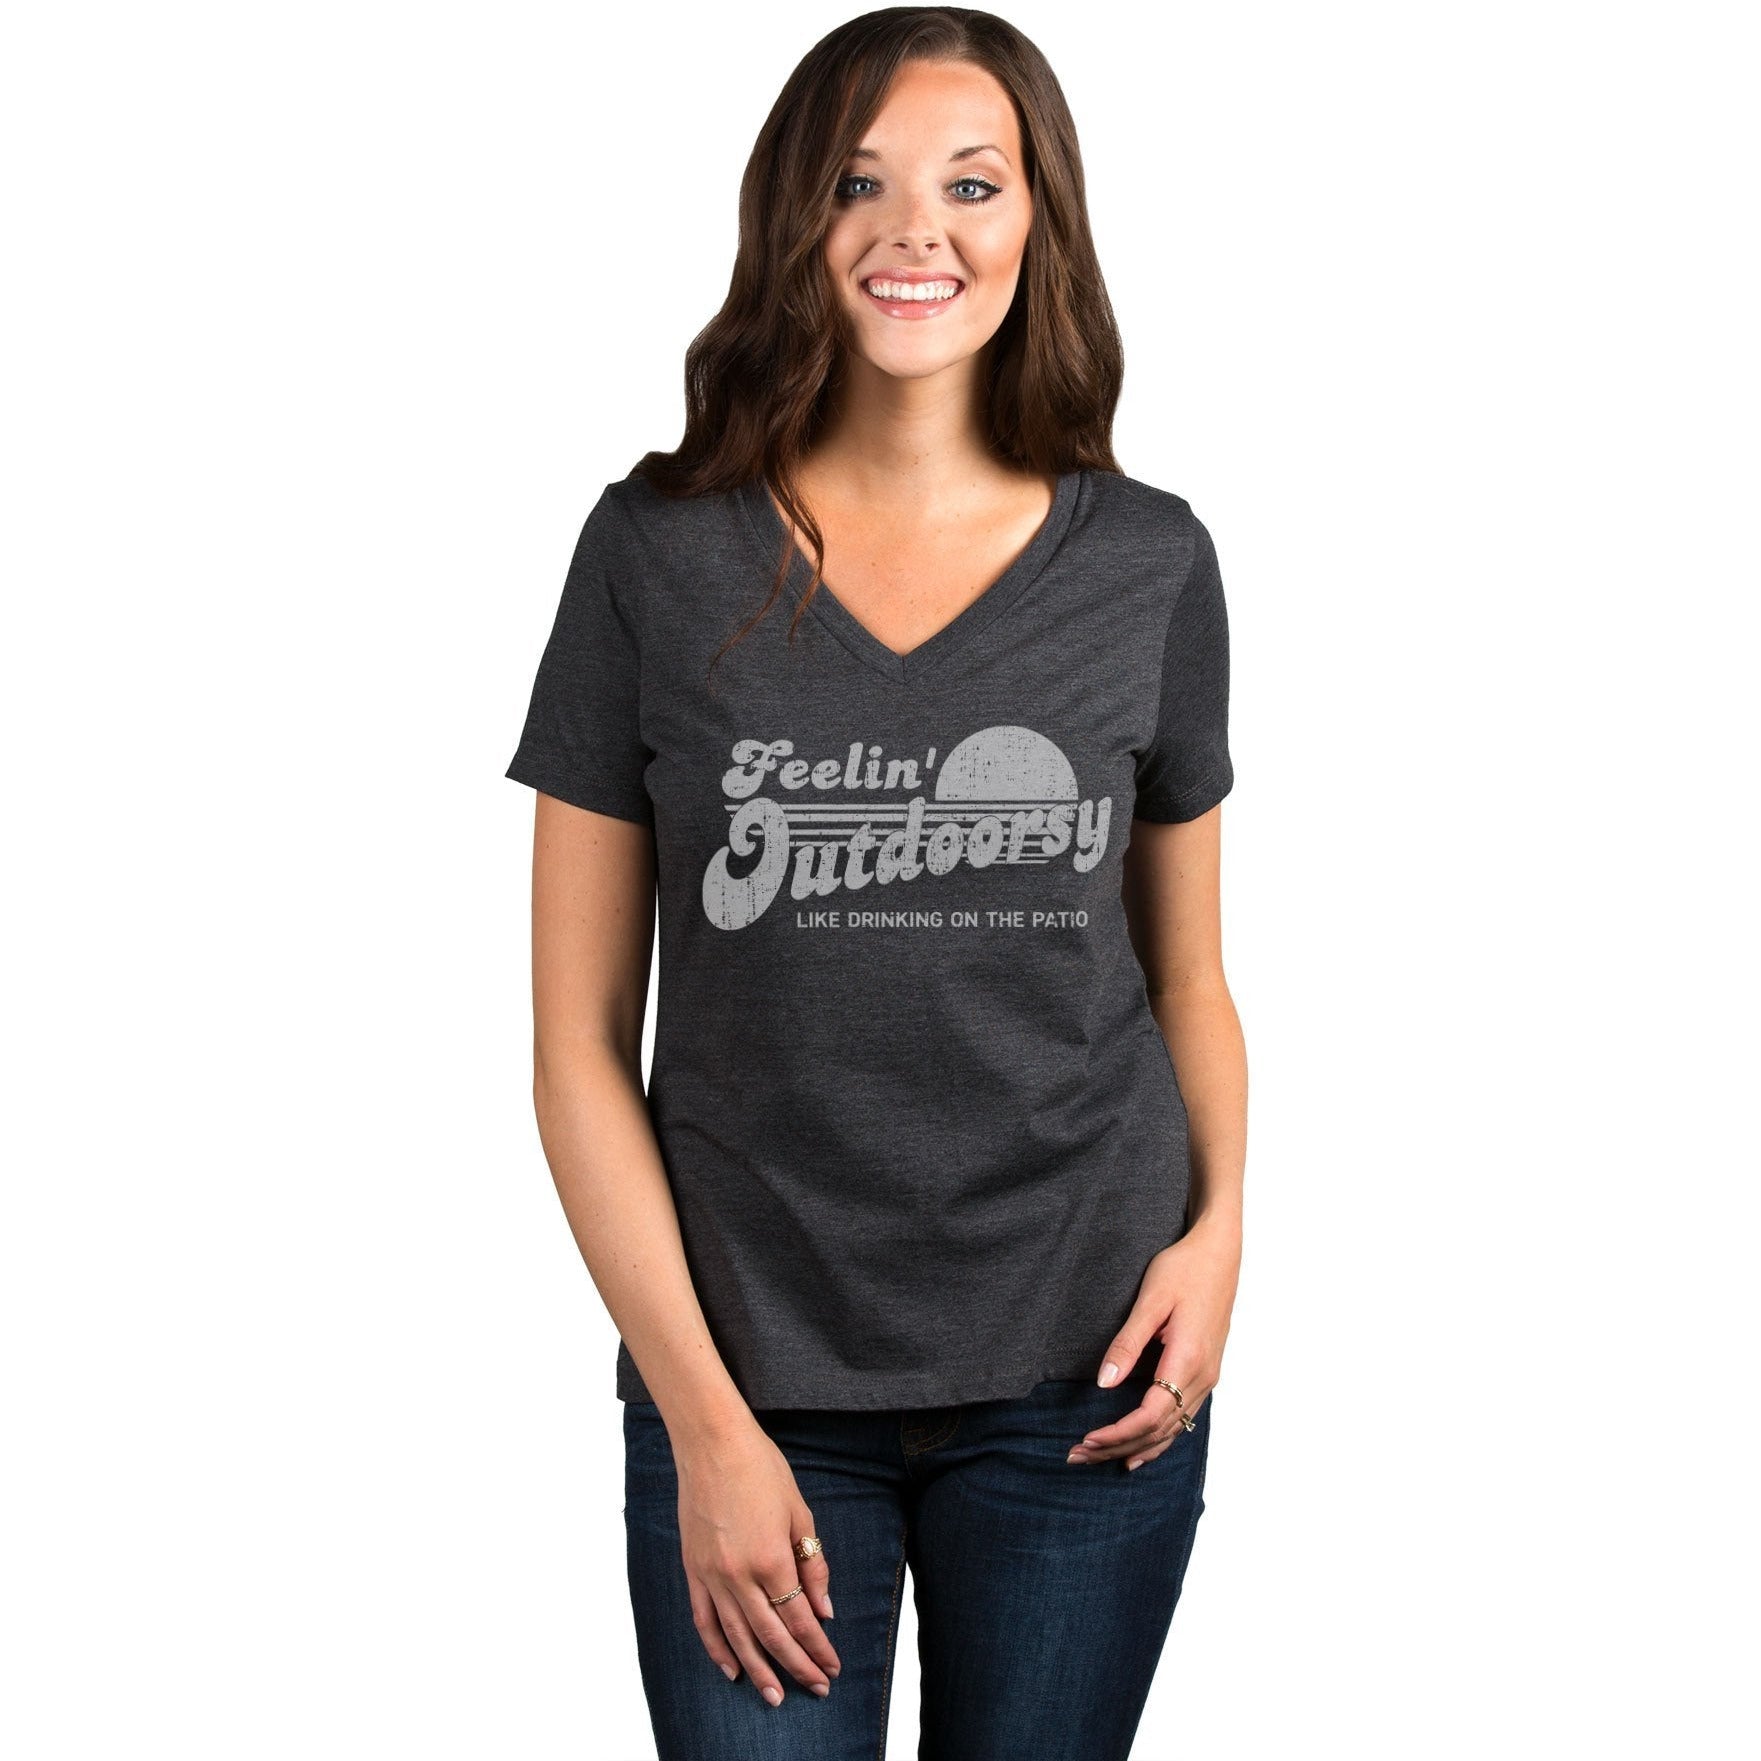 Feelin Outdoorsy Like Drinking On The Patio Women's Relaxed Crewneck T-Shirt Top Tee Charcoal Grey